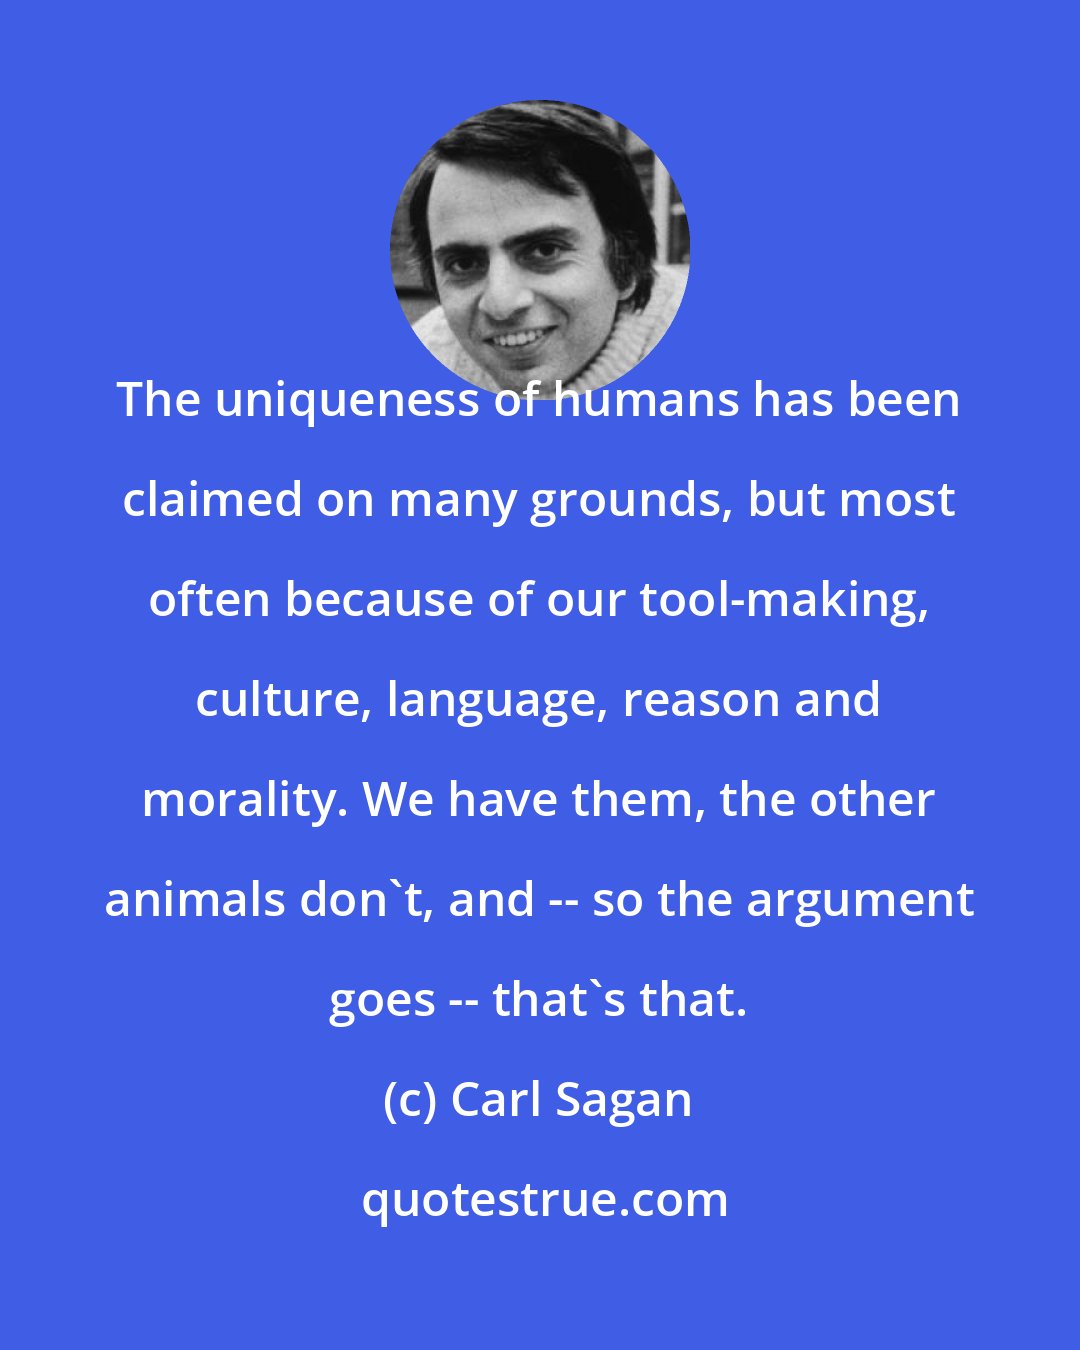 Carl Sagan: The uniqueness of humans has been claimed on many grounds, but most often because of our tool-making, culture, language, reason and morality. We have them, the other animals don't, and -- so the argument goes -- that's that.